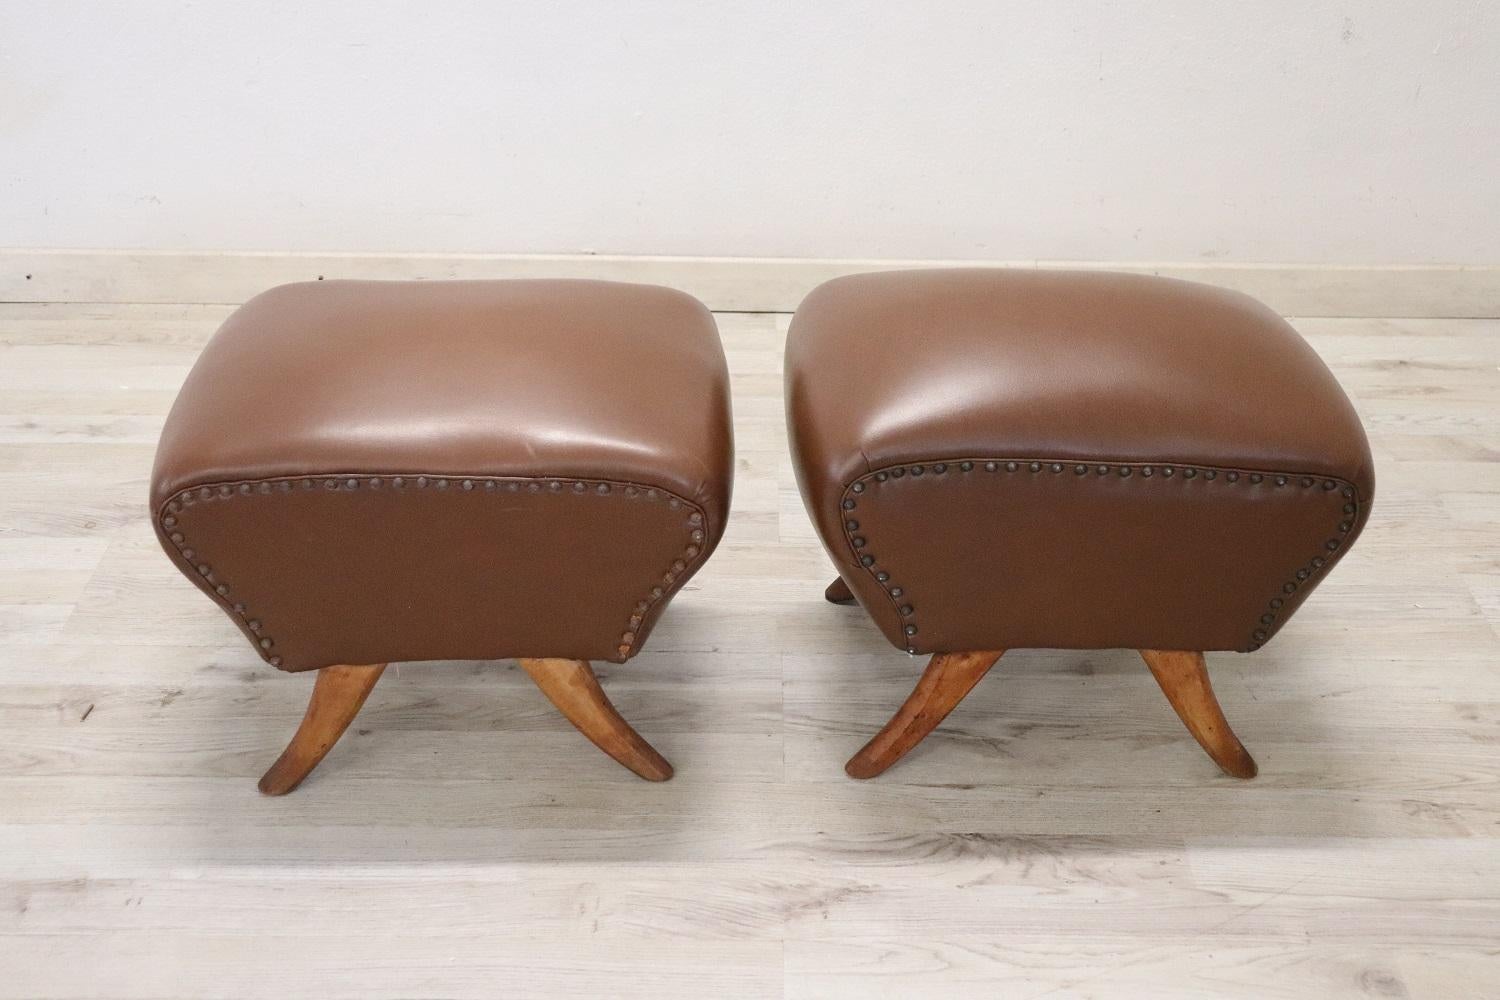 Italian Mid-Century Pair of Stools in Brown Faux Leather For Sale 2